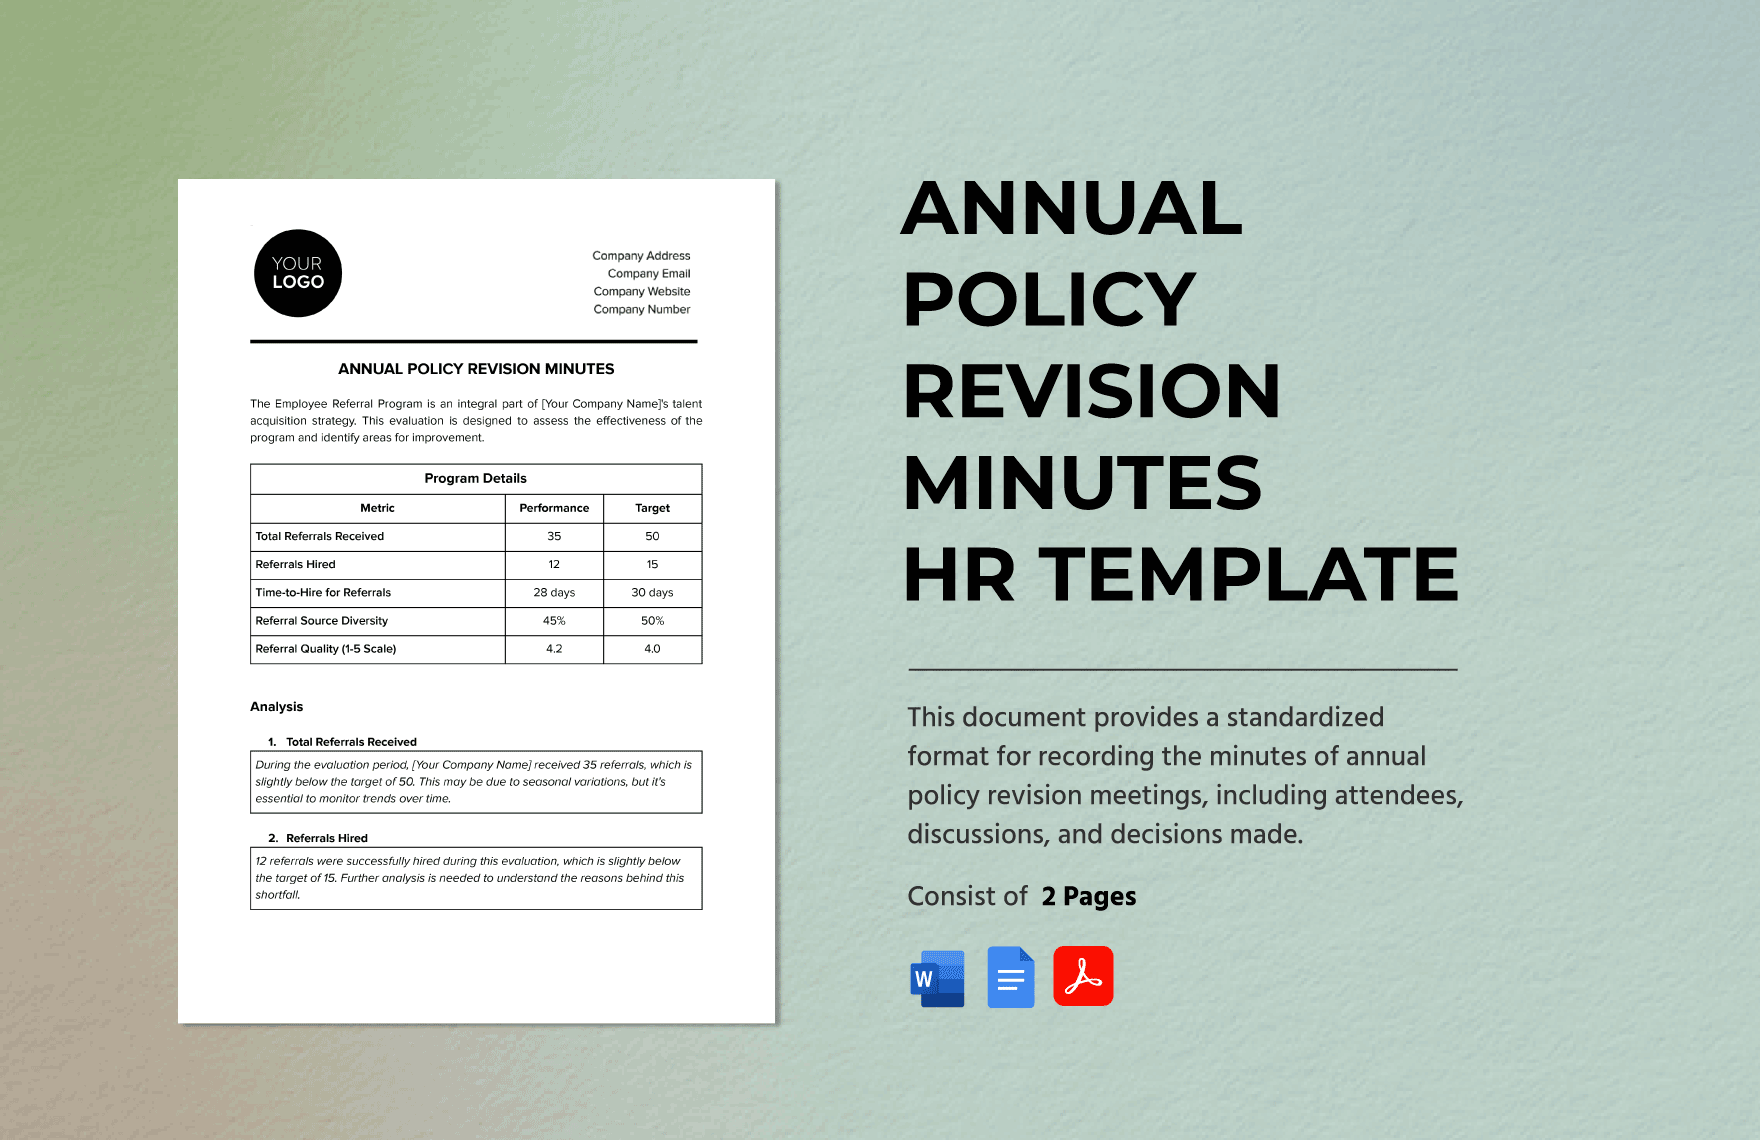 Annual Policy Revision Minutes HR Template